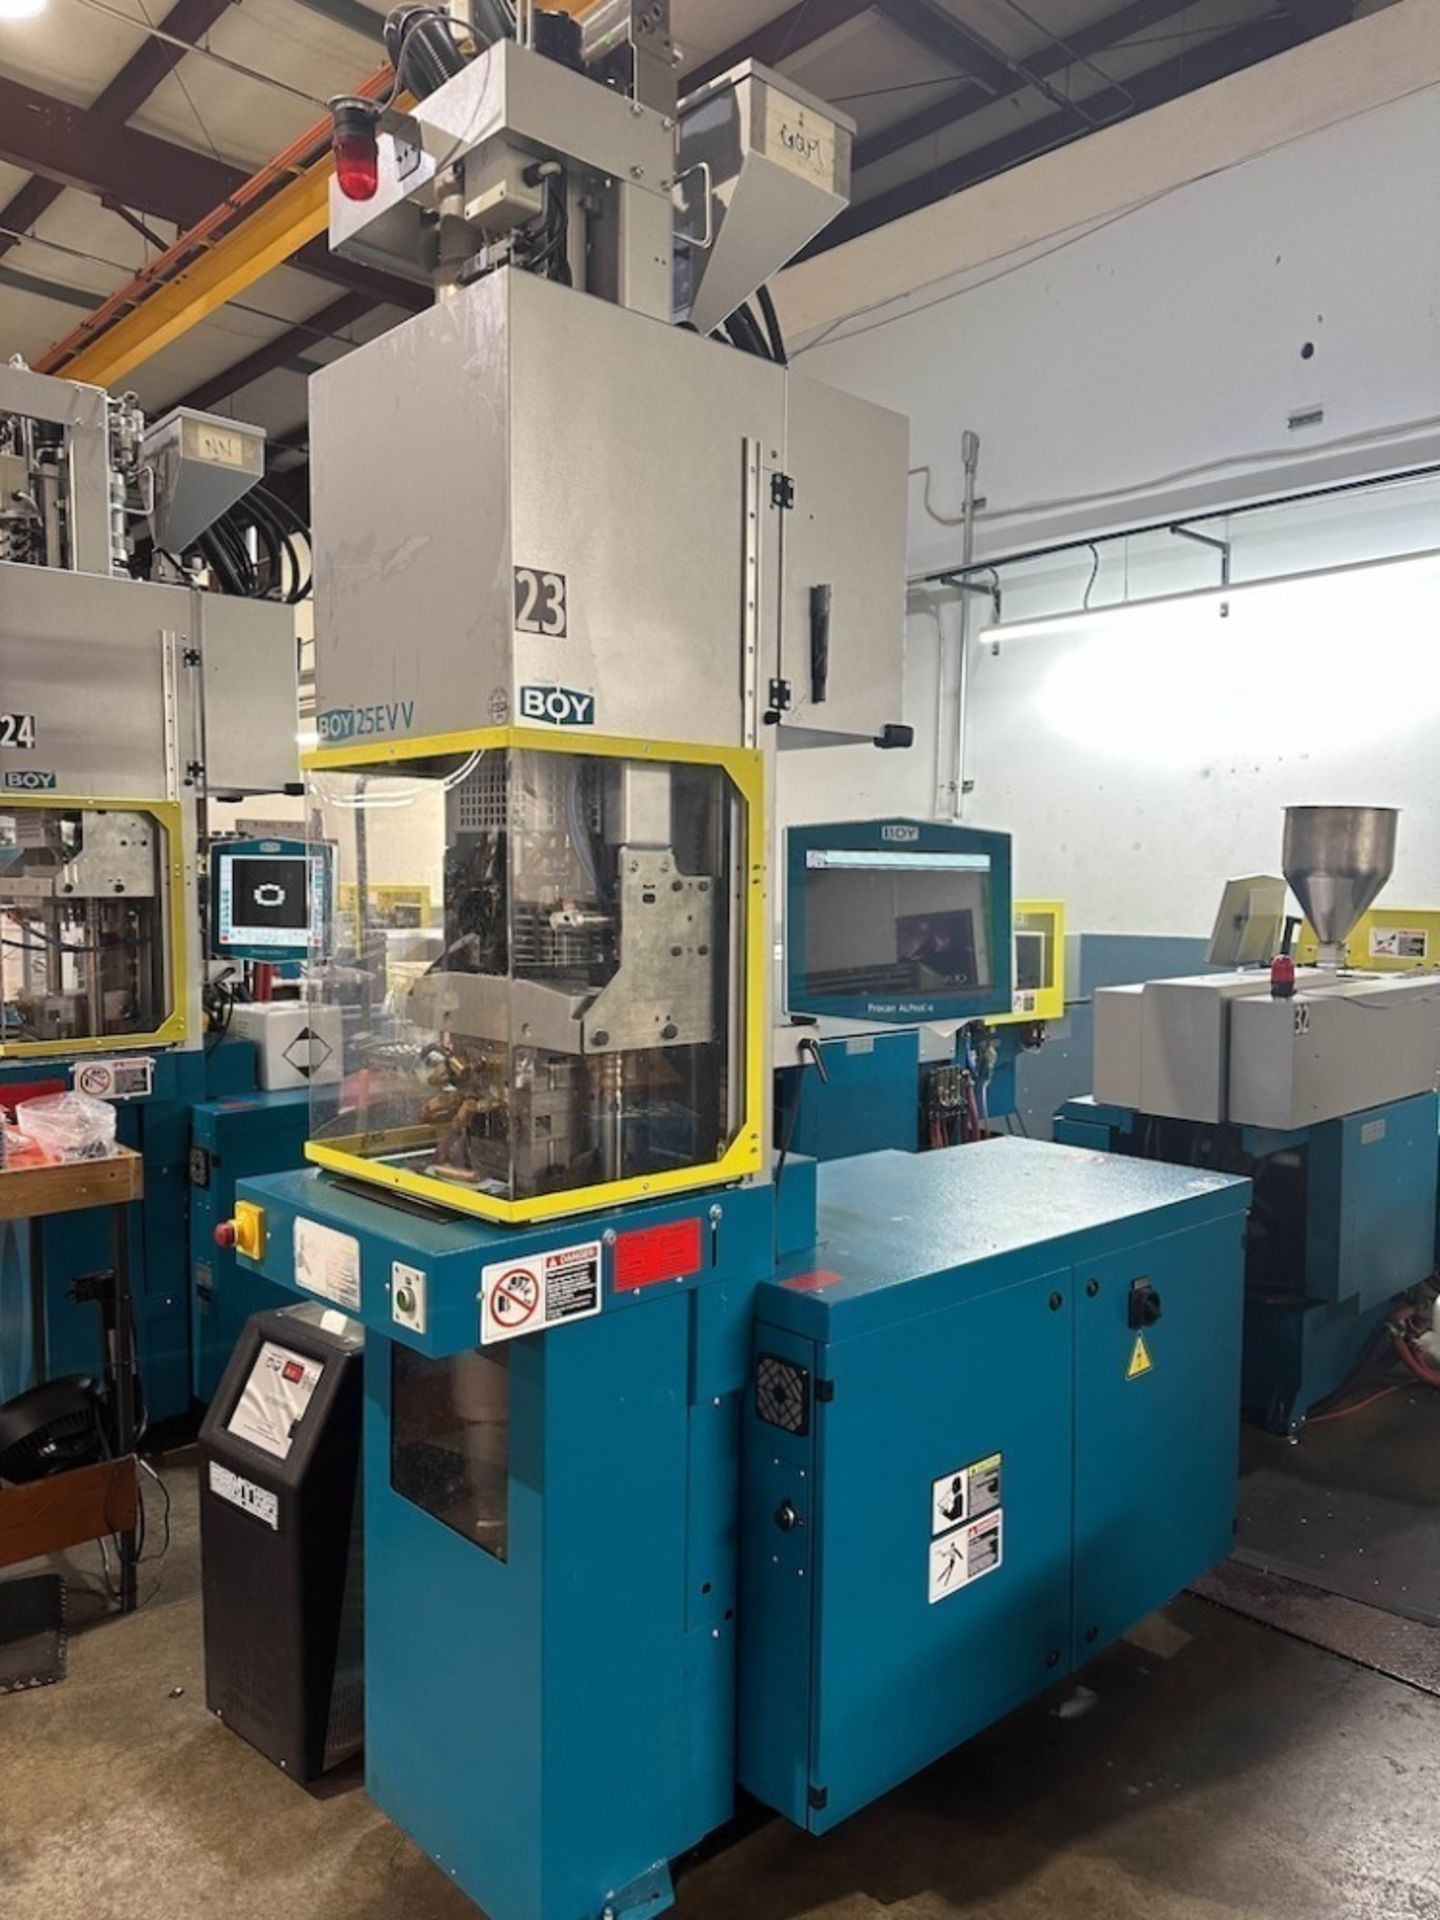 BOY 25 Ton Vertical/Vertical Injection Molding Press, New in 2018 - Image 2 of 7